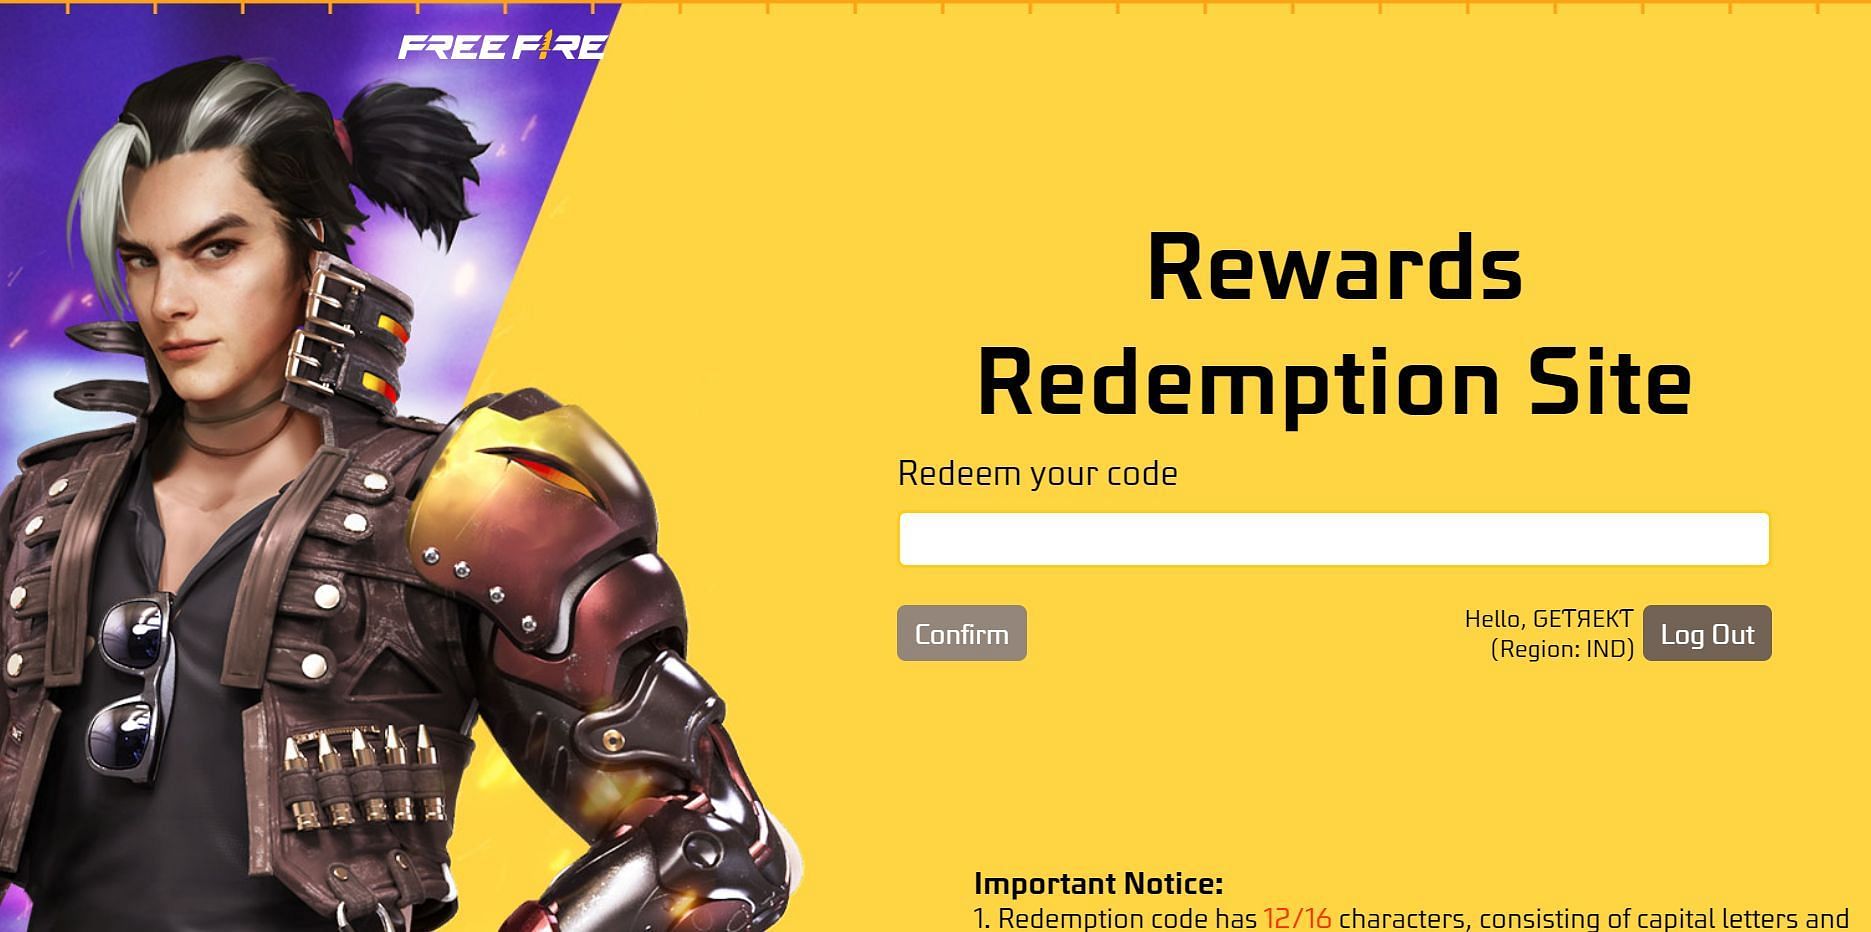 Enter the redemption code without errors in the text box, then click Confirm (Image via Garena)